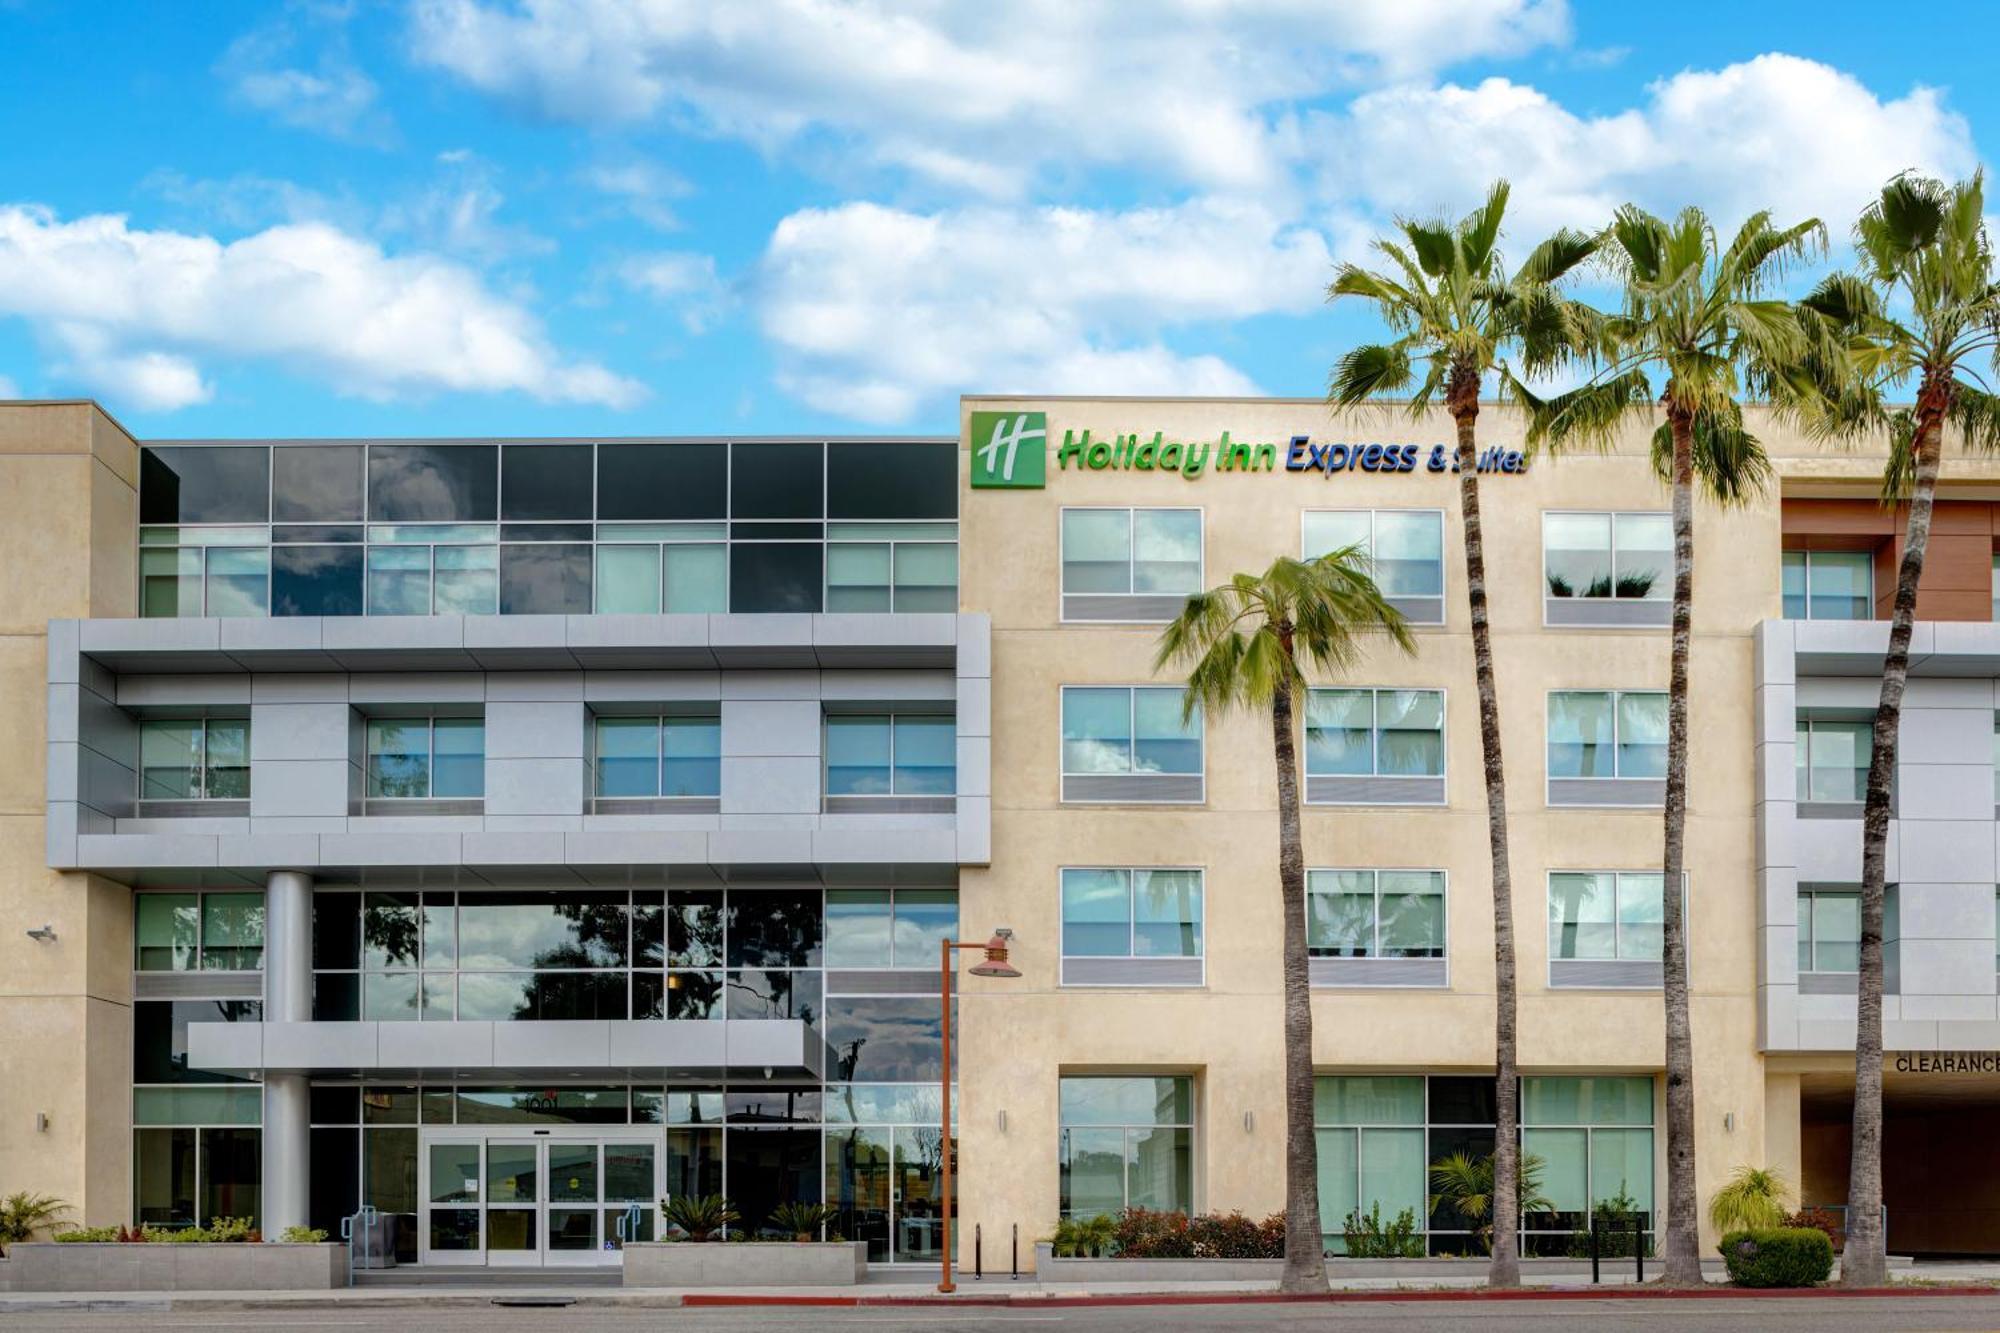 Holiday Inn Express & Suites - Glendale Downtown 外观 照片